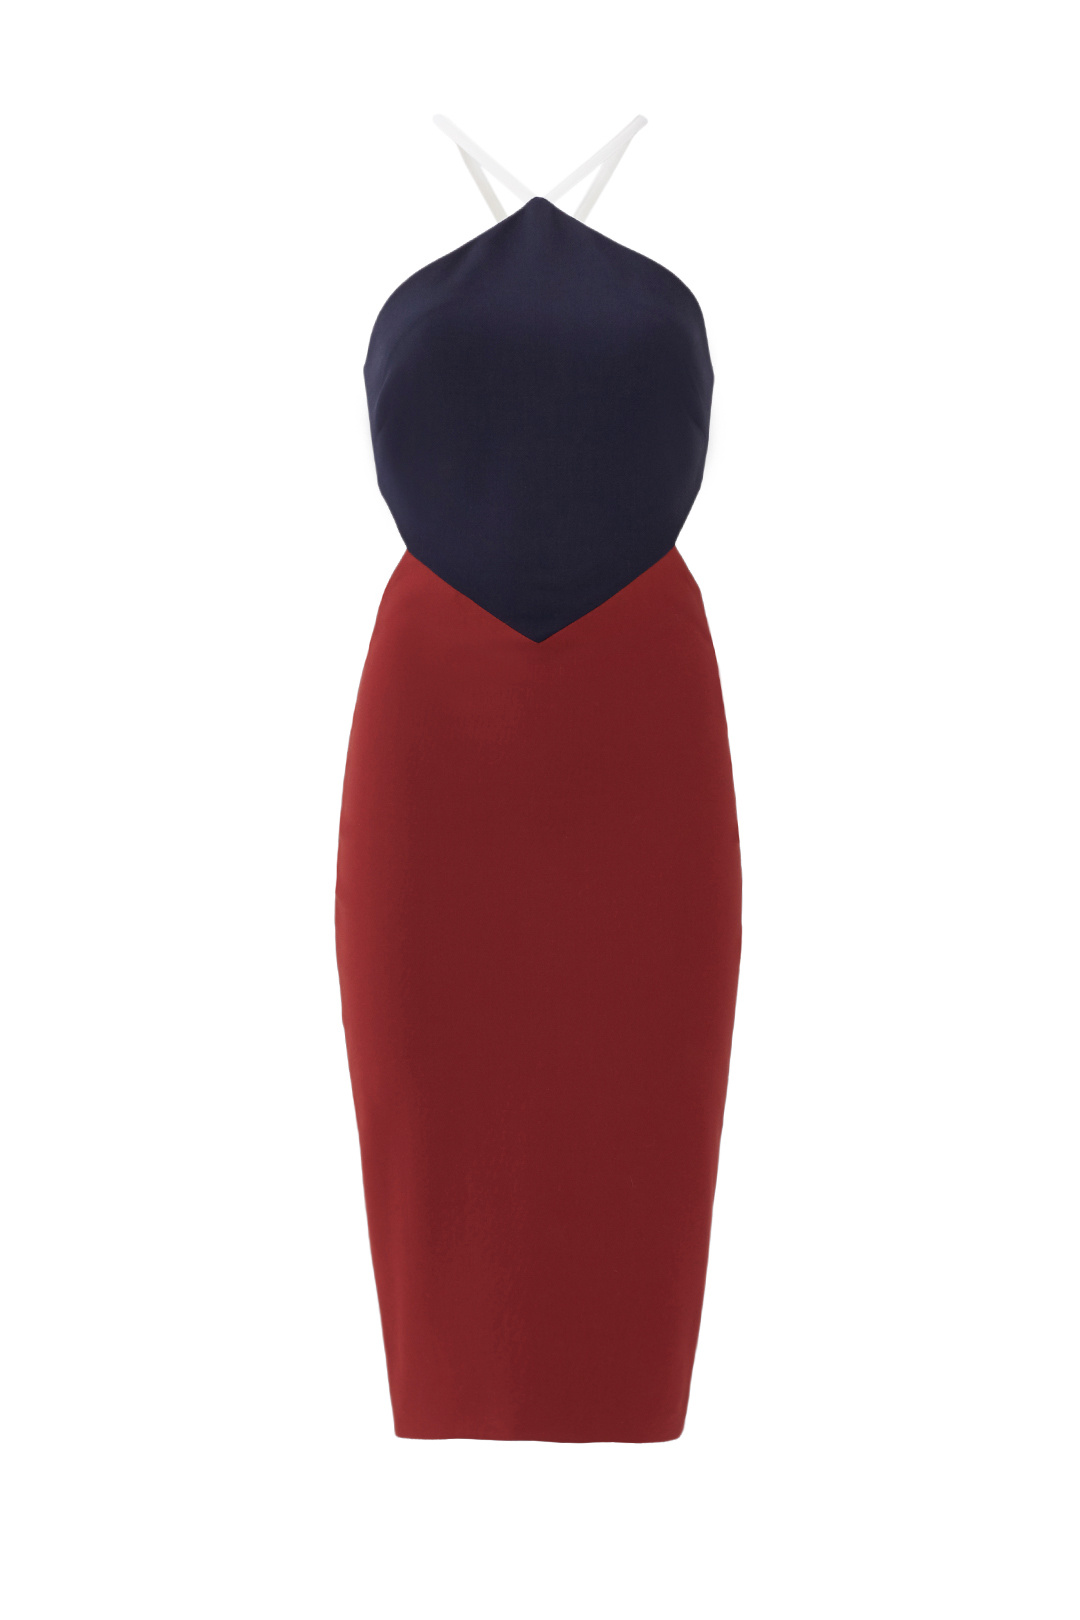 http://fashionbombdaily.com/wp-content/uploads/2016/06/Eniko-Parrishs-GQ-Love-Sex-and-Madness-Elizabeth-and-James-Red-and-Navy-Riza-Cutout-Stretch-Ponte-Dress.jpg